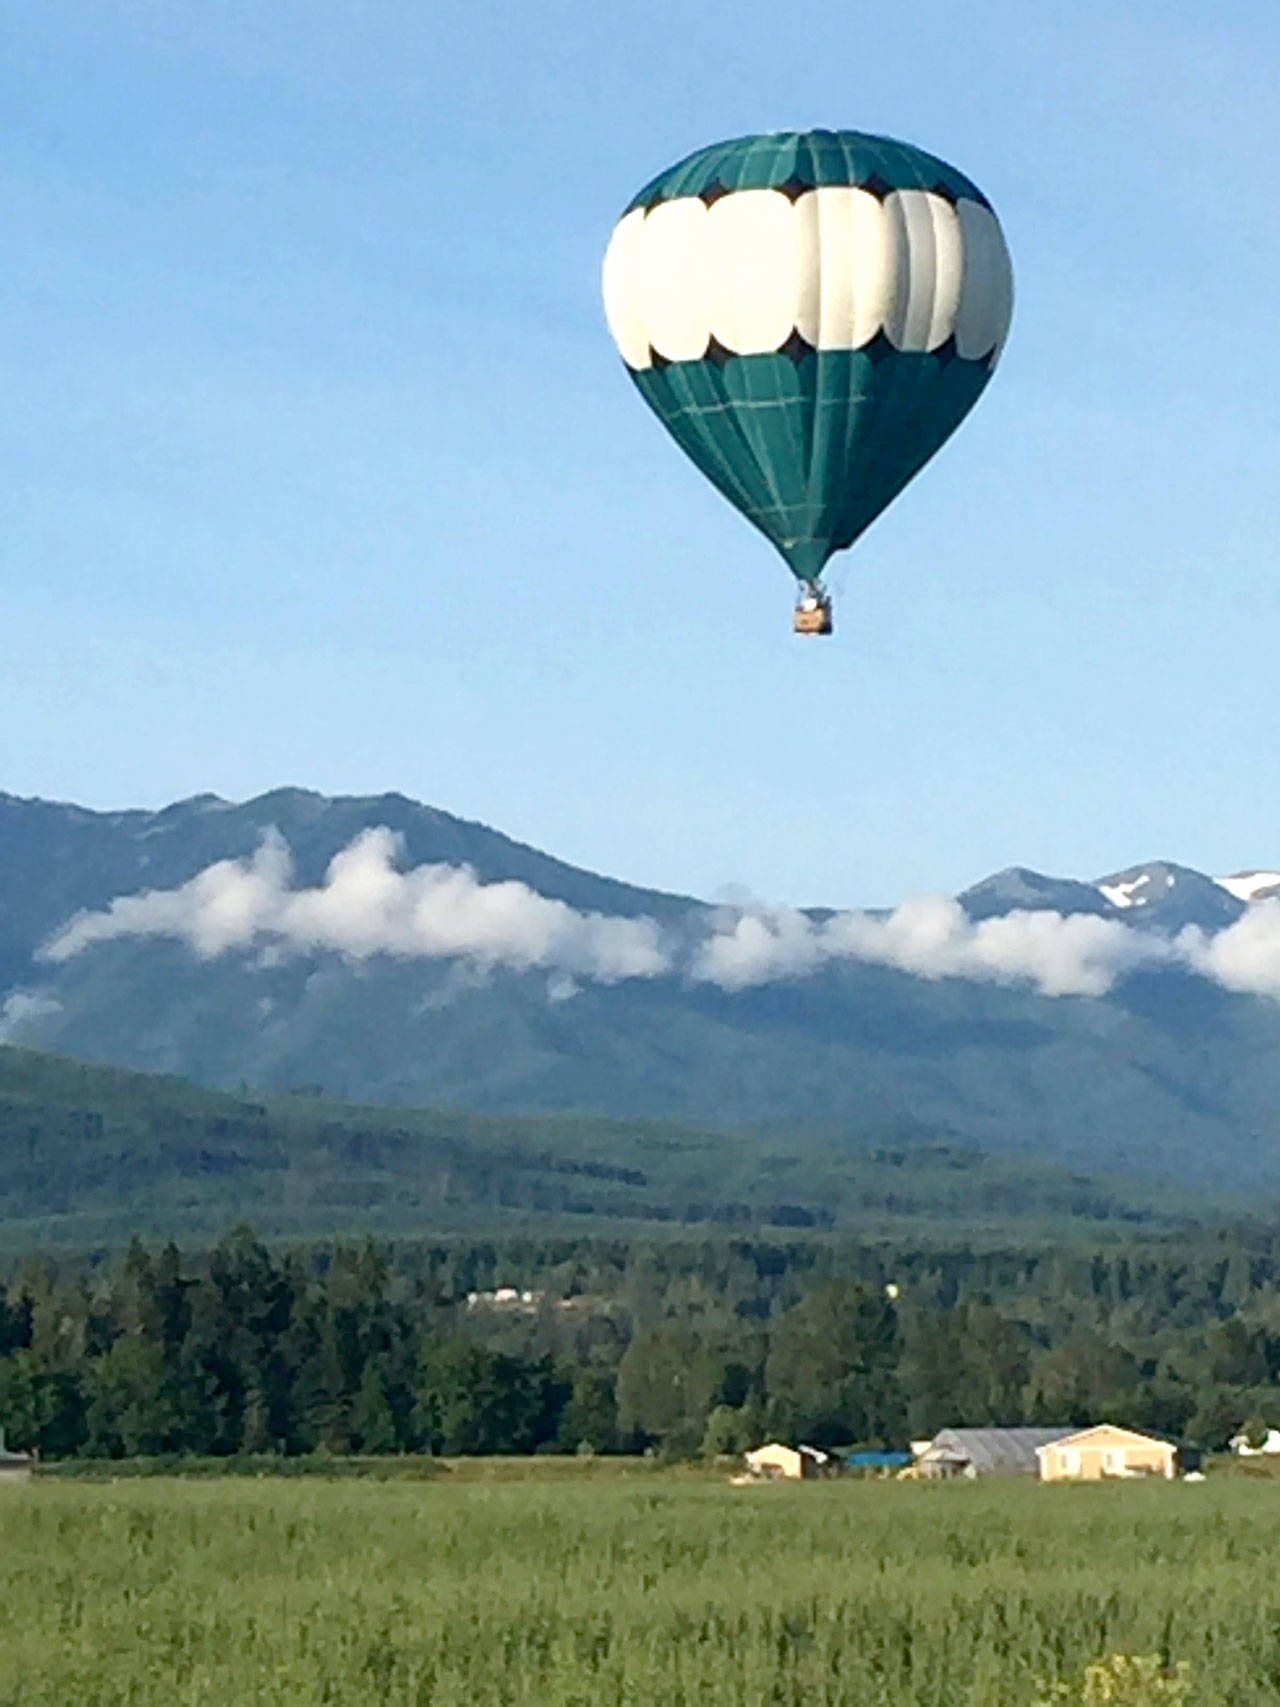 Captain-Crystal Stout of Morning Star Balloon Co. was planning to offer hot air balloon rides during FairWinds Winery’s Augtoberfest event this Saturday. (Photo courtesy of Captain-Crystal Stout)